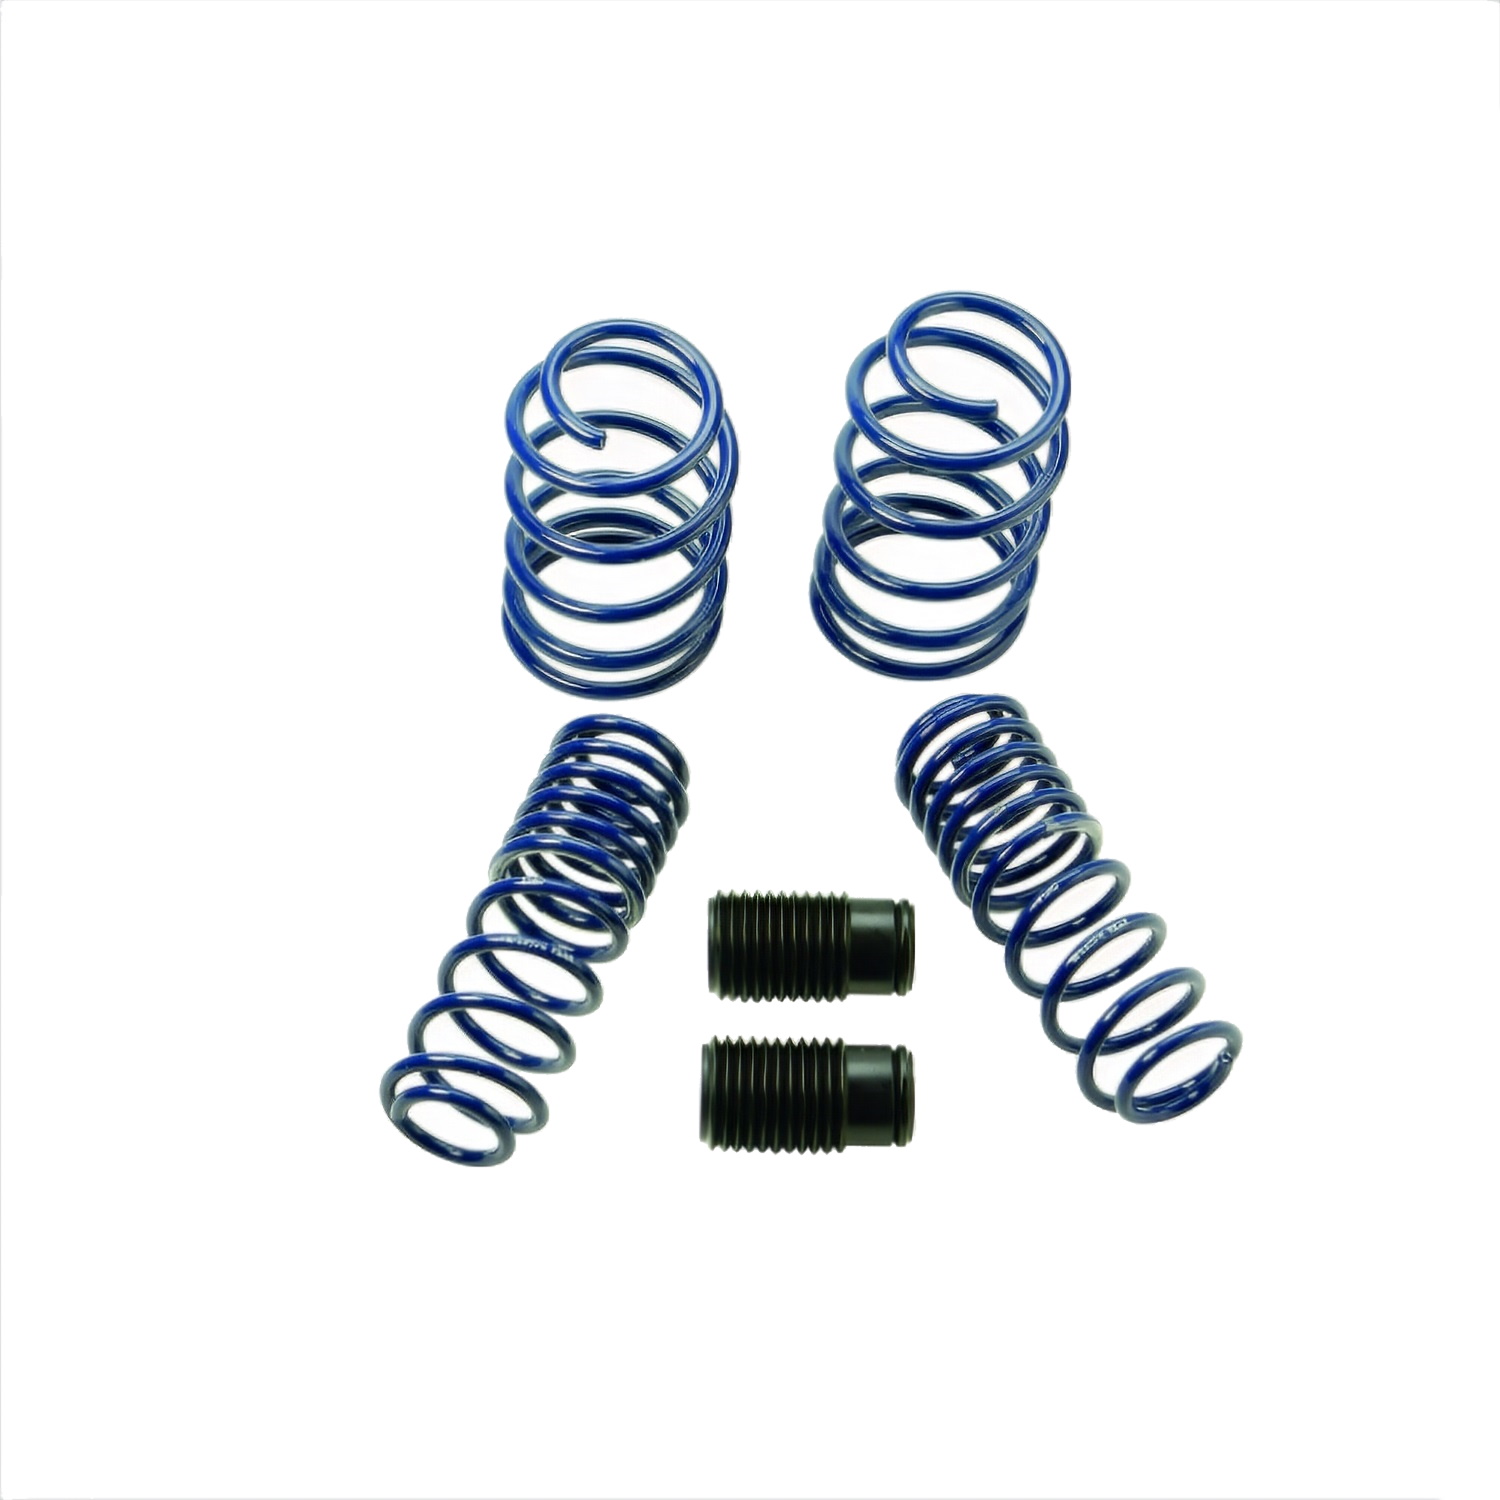 Ford Racing Ford Racing M-5300-K Spring Kit Fits 05-14 Mustang